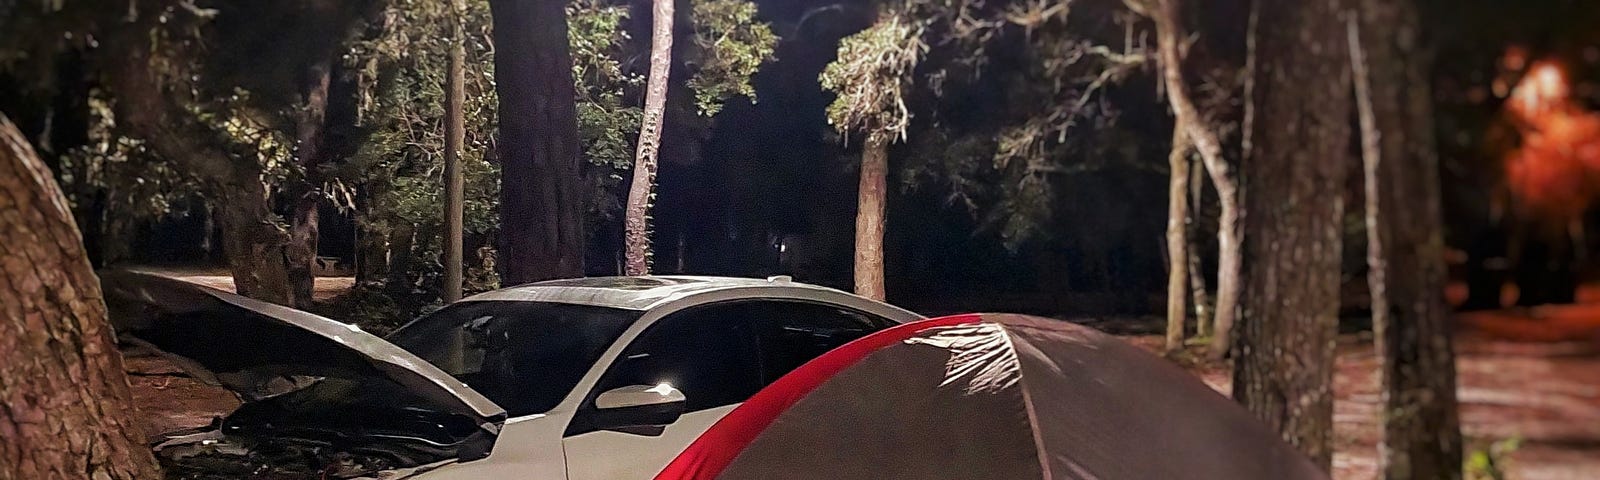 A car with its hood up to keep the critters from nesting and chewing on wires, parked at a camping spot with a small tent, surrounded by pine trees.